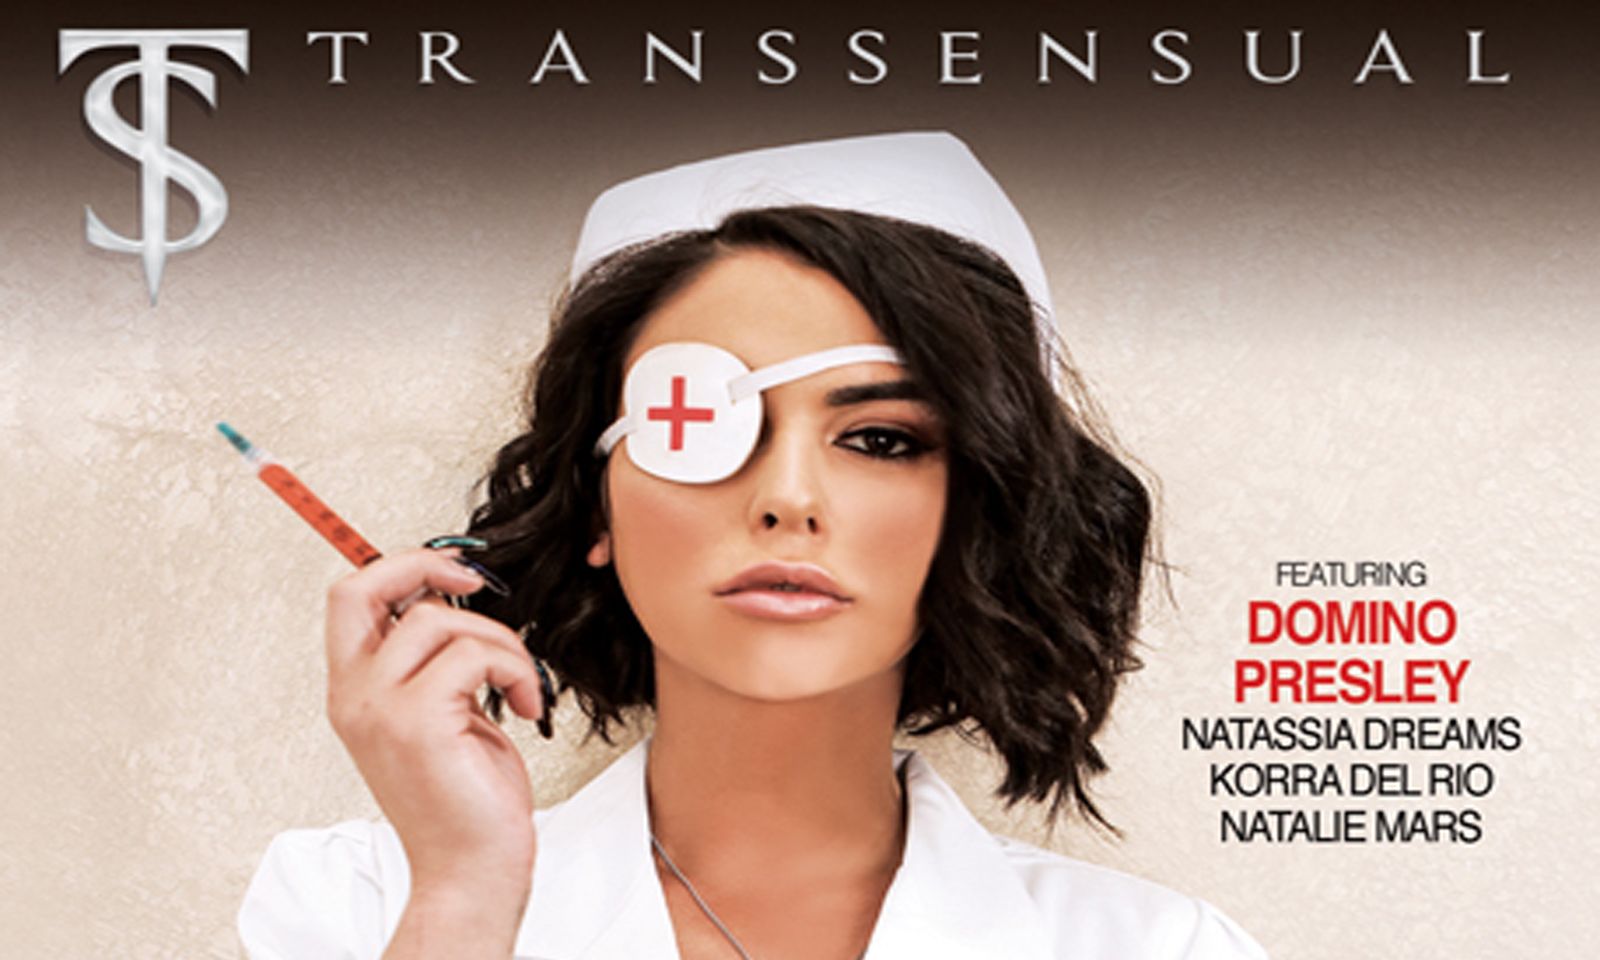 'TS Nurses 2' Continues the Sexual Healing from TransSensual